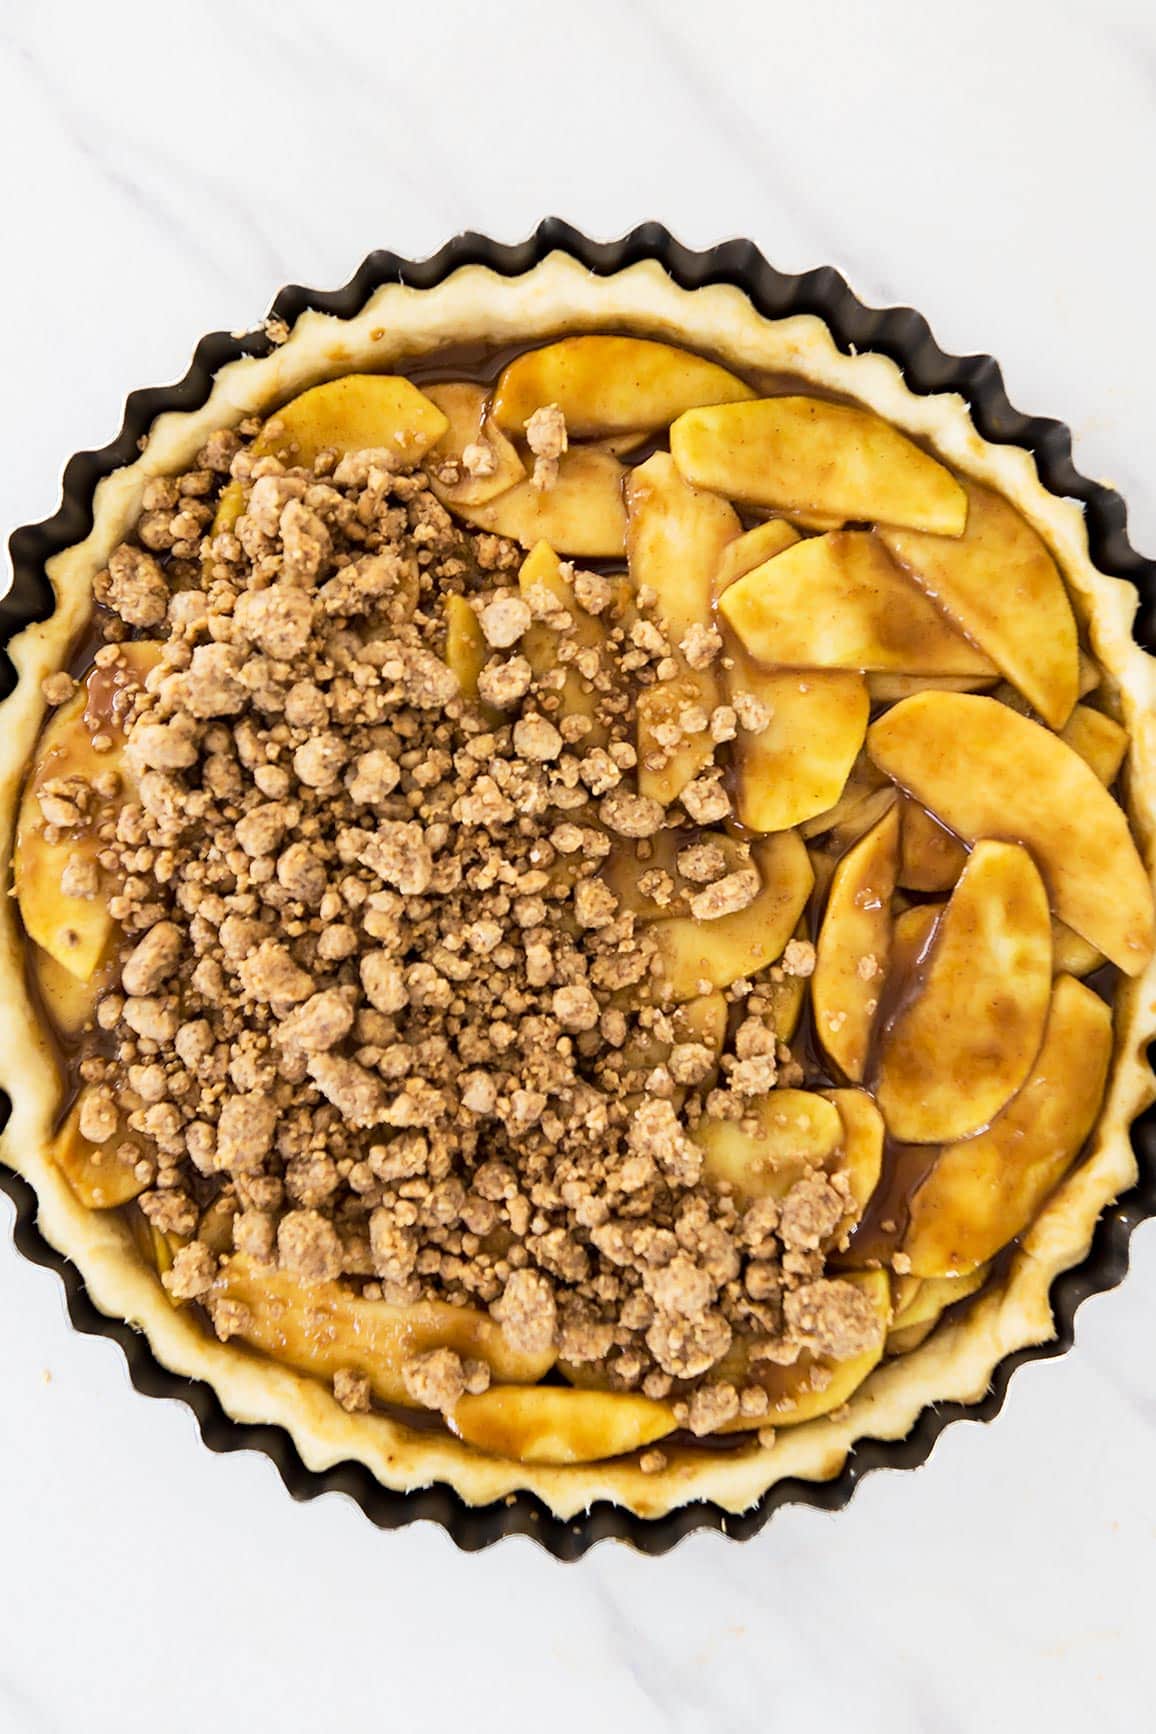 Peanut Butter Apple Pie with crumble topping